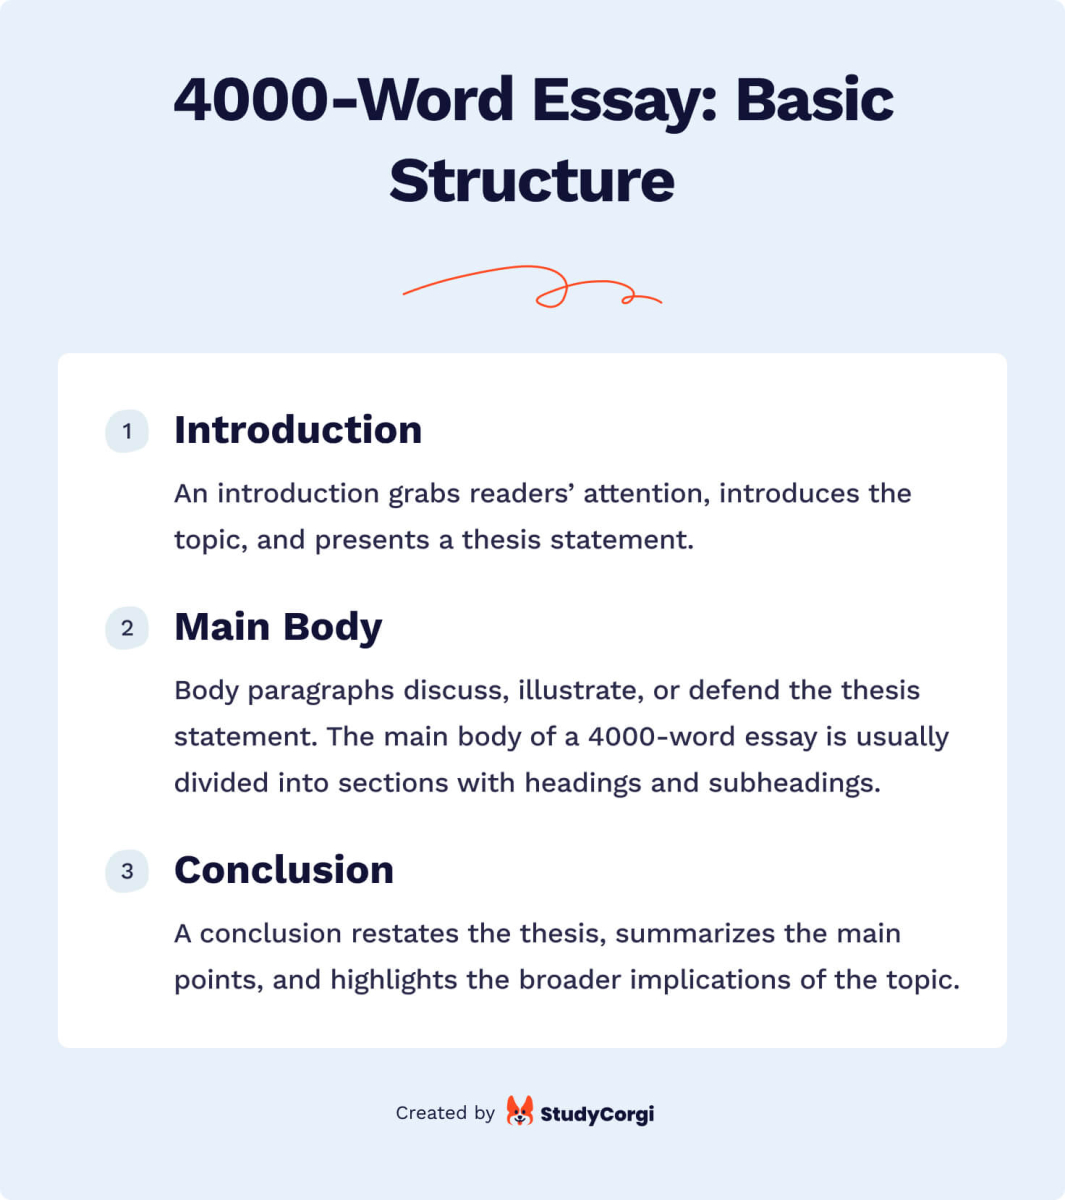 This image shows a 4000-word essay structure.